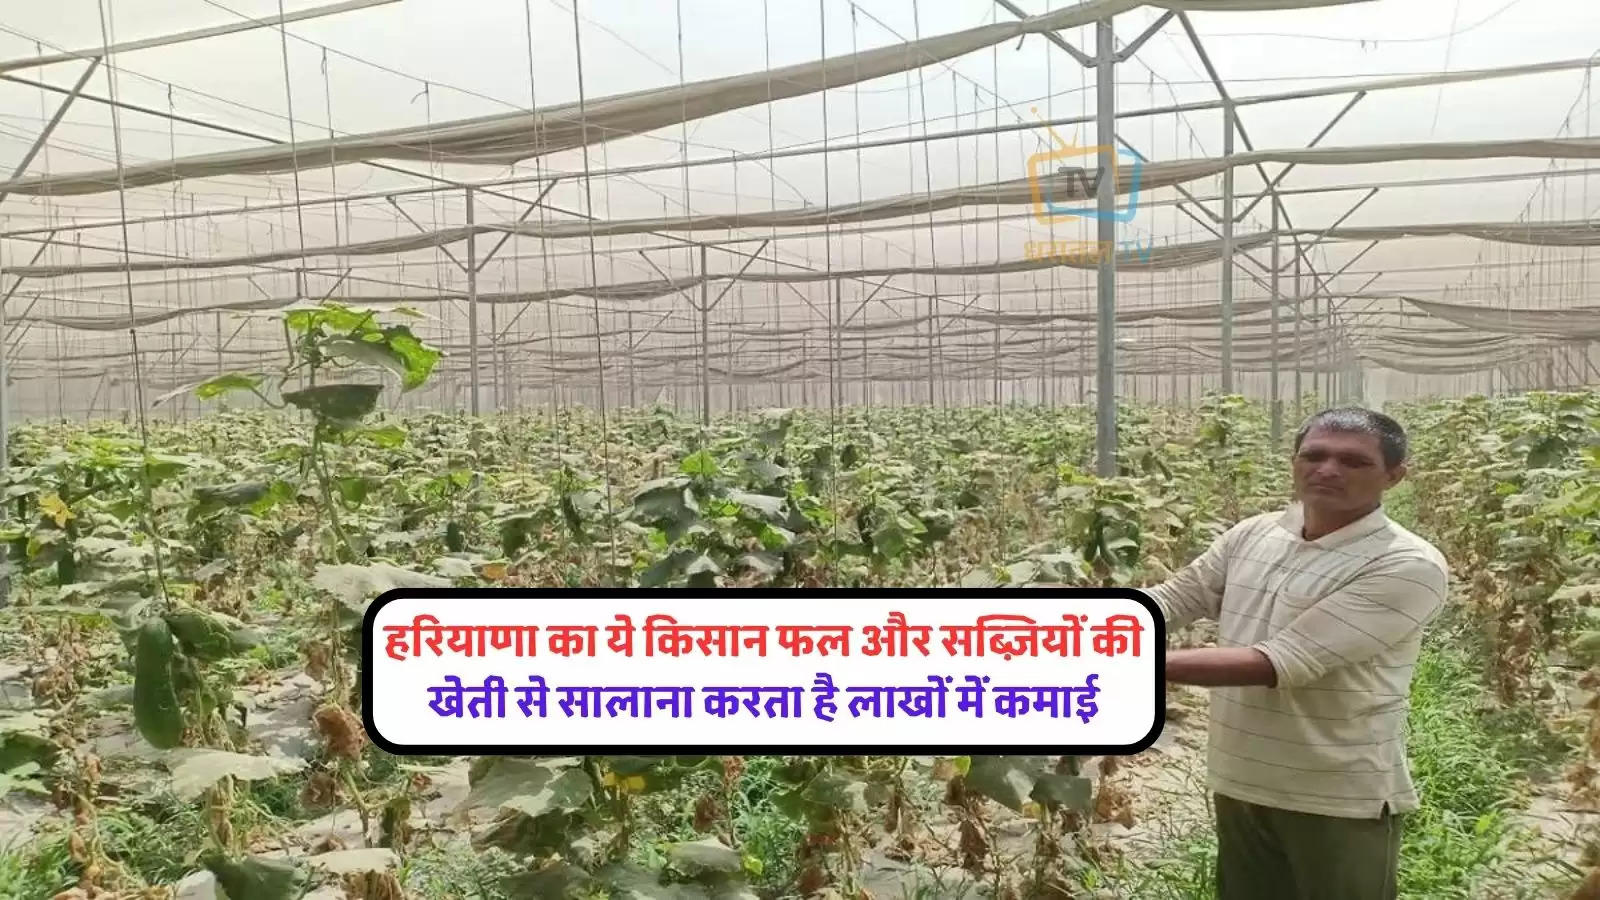 this-farmer-of-haryana-earns-a-profit-of-30-lakhs-annually-is-earning-well-in-the-cultivation-of-fruits-and-vegetables